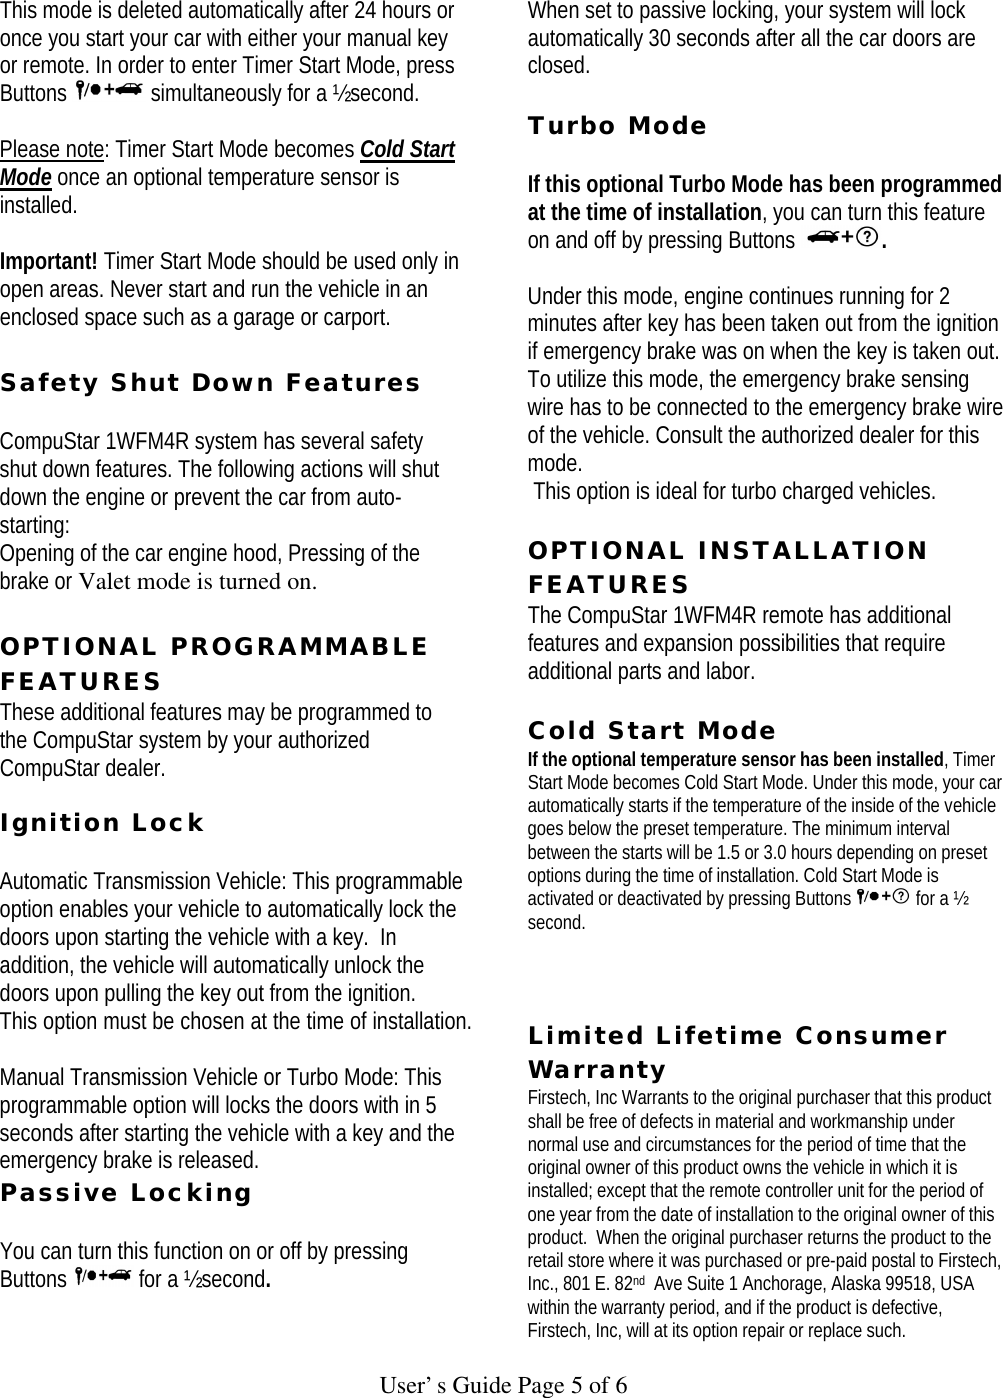   User’s Guide Page 5 of 6 This mode is deleted automatically after 24 hours or once you start your car with either your manual key or remote. In order to enter Timer Start Mode, press Buttons   simultaneously for a ½ second.   Please note: Timer Start Mode becomes Cold Start Mode once an optional temperature sensor is installed.    Important! Timer Start Mode should be used only in open areas. Never start and run the vehicle in an enclosed space such as a garage or carport.  Safety Shut Down Features   CompuStar 1WFM4R system has several safety shut down features. The following actions will shut down the engine or prevent the car from auto-starting:  Opening of the car engine hood, Pressing of the brake or Valet mode is turned on.   OPTIONAL PROGRAMMABLE FEATURES These additional features may be programmed to the CompuStar system by your authorized CompuStar dealer.     Ignition Lock   Automatic Transmission Vehicle: This programmable option enables your vehicle to automatically lock the doors upon starting the vehicle with a key.  In addition, the vehicle will automatically unlock the doors upon pulling the key out from the ignition.  This option must be chosen at the time of installation.   Manual Transmission Vehicle or Turbo Mode: This programmable option will locks the doors with in 5 seconds after starting the vehicle with a key and the emergency brake is released.   Passive Locking   You can turn this function on or off by pressing Buttons   for a ½ second.   When set to passive locking, your system will lock automatically 30 seconds after all the car doors are closed.    Turbo Mode   If this optional Turbo Mode has been programmed at the time of installation, you can turn this feature on and off by pressing Buttons  .   Under this mode, engine continues running for 2 minutes after key has been taken out from the ignition if emergency brake was on when the key is taken out.  To utilize this mode, the emergency brake sensing wire has to be connected to the emergency brake wire of the vehicle. Consult the authorized dealer for this mode.  This option is ideal for turbo charged vehicles.   OPTIONAL INSTALLATION FEATURES  The CompuStar 1WFM4R remote has additional features and expansion possibilities that require additional parts and labor.   Cold Start Mode  If the optional temperature sensor has been installed, Timer Start Mode becomes Cold Start Mode. Under this mode, your car automatically starts if the temperature of the inside of the vehicle goes below the preset temperature. The minimum interval between the starts will be 1.5 or 3.0 hours depending on preset options during the time of installation. Cold Start Mode is activated or deactivated by pressing Buttons   for a ½ second.    Limited Lifetime Consumer Warranty  Firstech, Inc Warrants to the original purchaser that this product shall be free of defects in material and workmanship under normal use and circumstances for the period of time that the original owner of this product owns the vehicle in which it is installed; except that the remote controller unit for the period of one year from the date of installation to the original owner of this product.  When the original purchaser returns the product to the retail store where it was purchased or pre-paid postal to Firstech, Inc., 801 E. 82nd  Ave Suite 1 Anchorage, Alaska 99518, USA within the warranty period, and if the product is defective, Firstech, Inc, will at its option repair or replace such. 